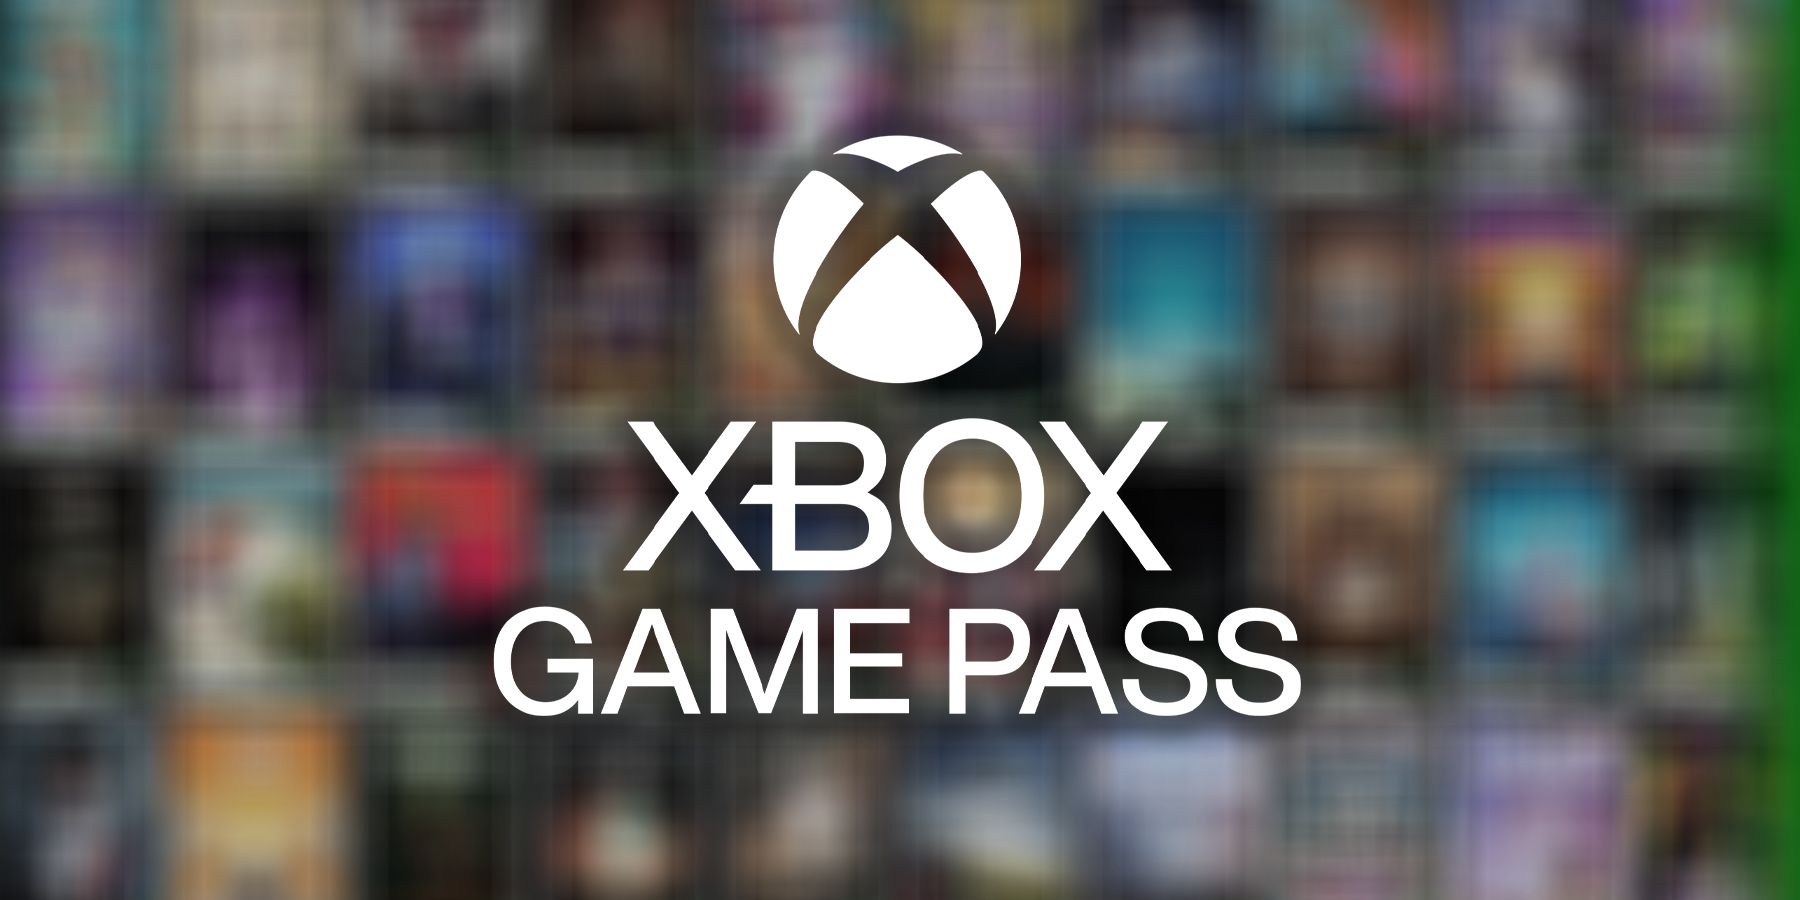 xbox game pass logo over blurred covers